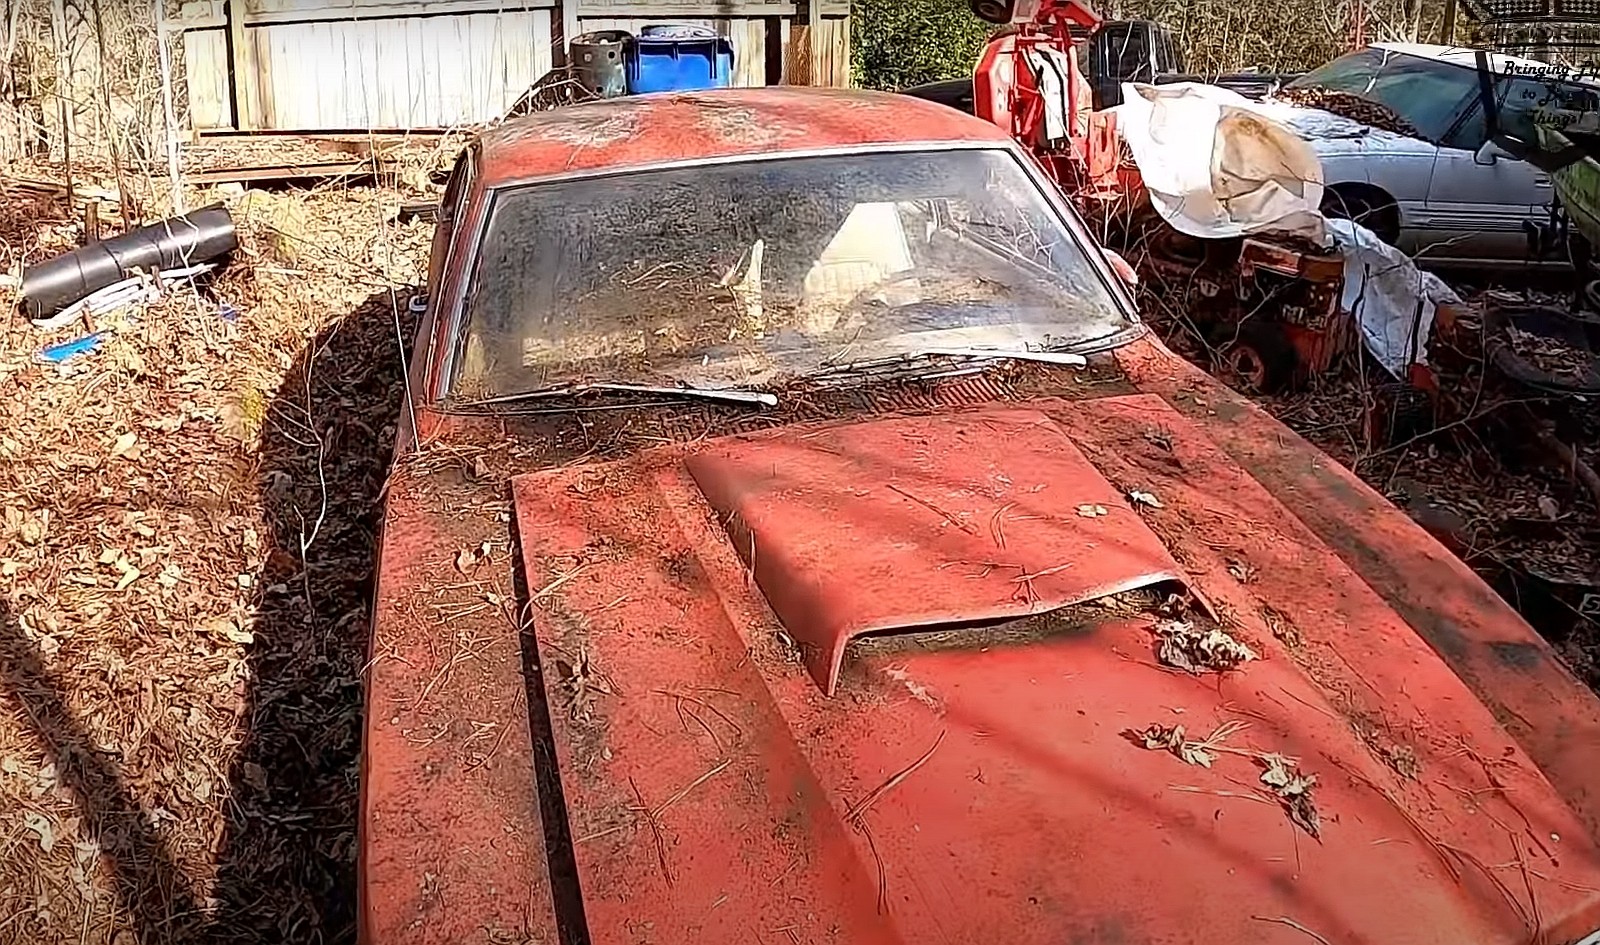 1973 mercury comet gt was left to rot in woods 302 v8 roars again after 36 years 1